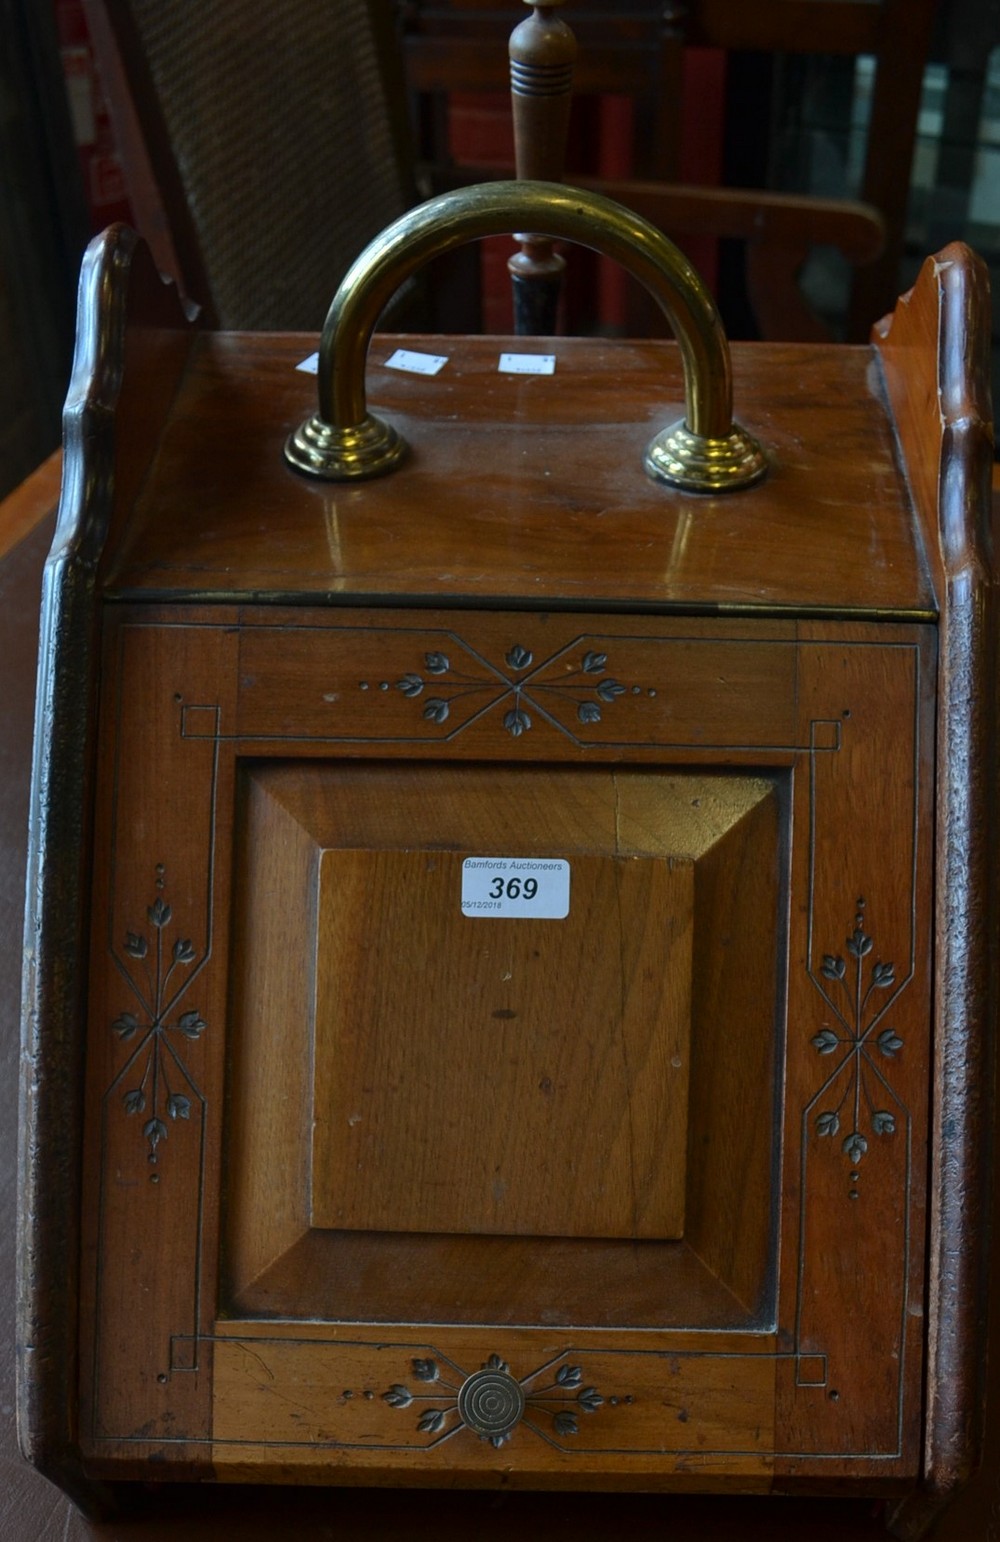 An early 20th century coal scuttle